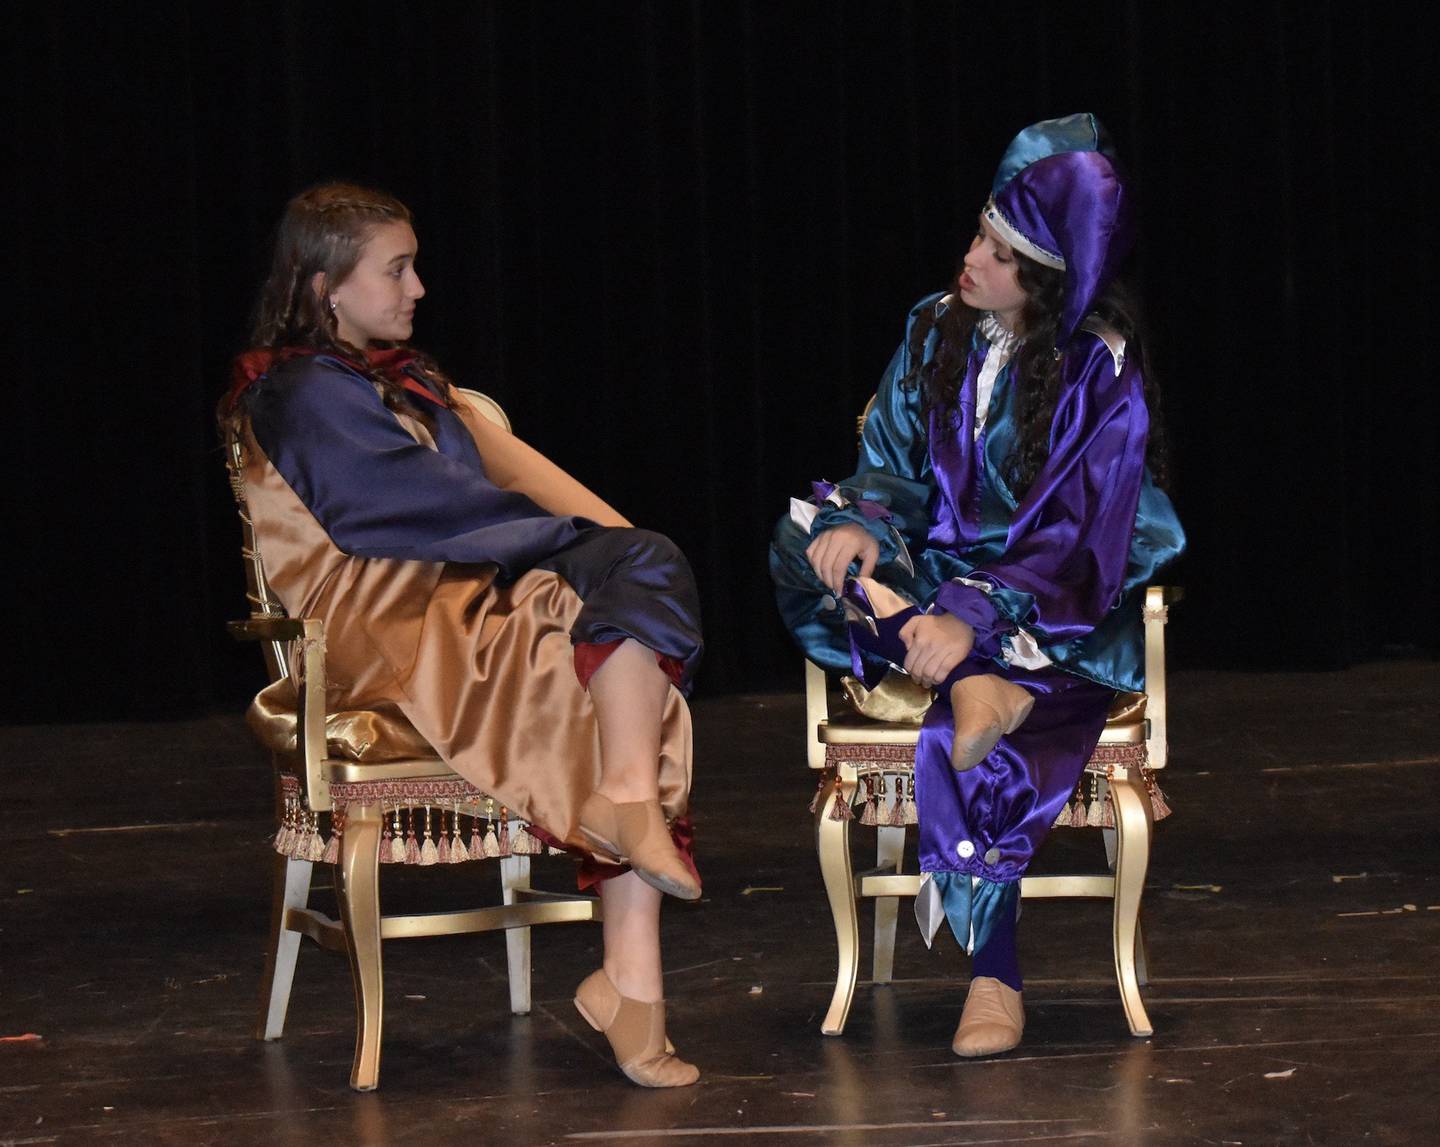 Coal City High School students Izzy Kostbade [left] and Adeline Dowling [right] serve as jesters of the Madrigal royal court. The Madrigals will host their annual holiday performances in the Coal City Performing Arts Center, Dec. 9-11.